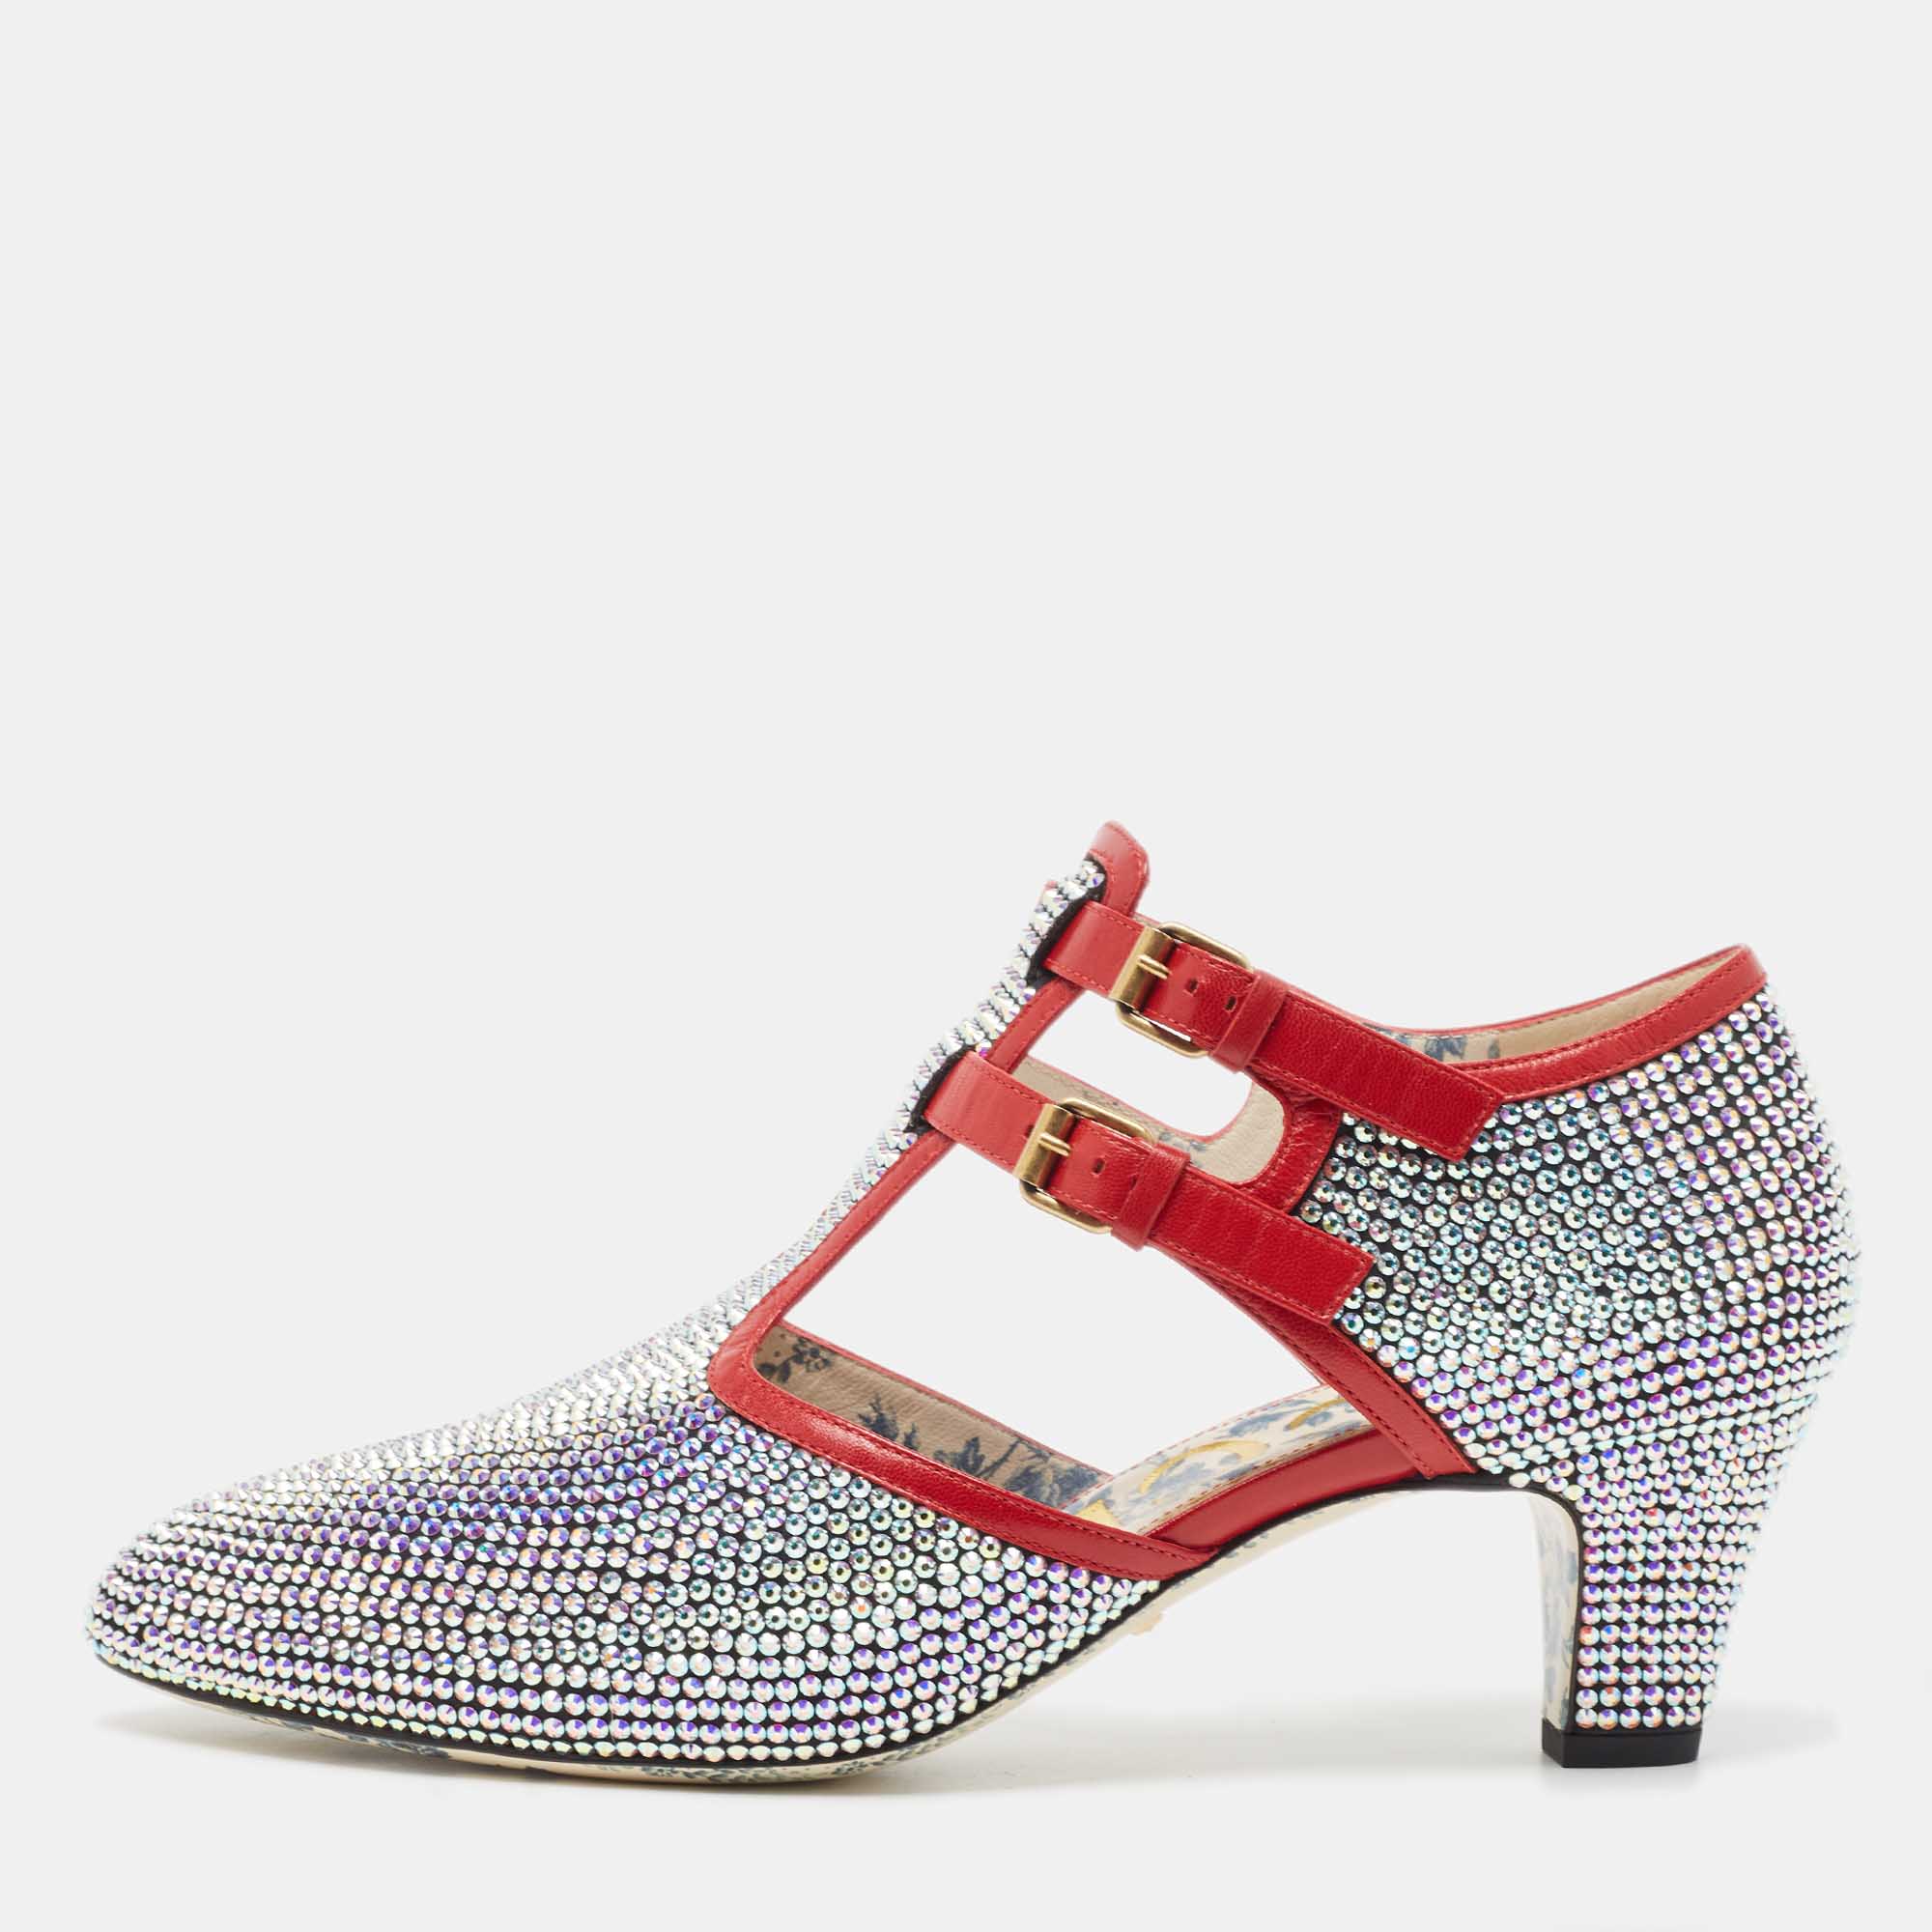 Gucci Metallic/Red Crystal Embellished Fabric and Leather T-Bar Pumps Size 40.5